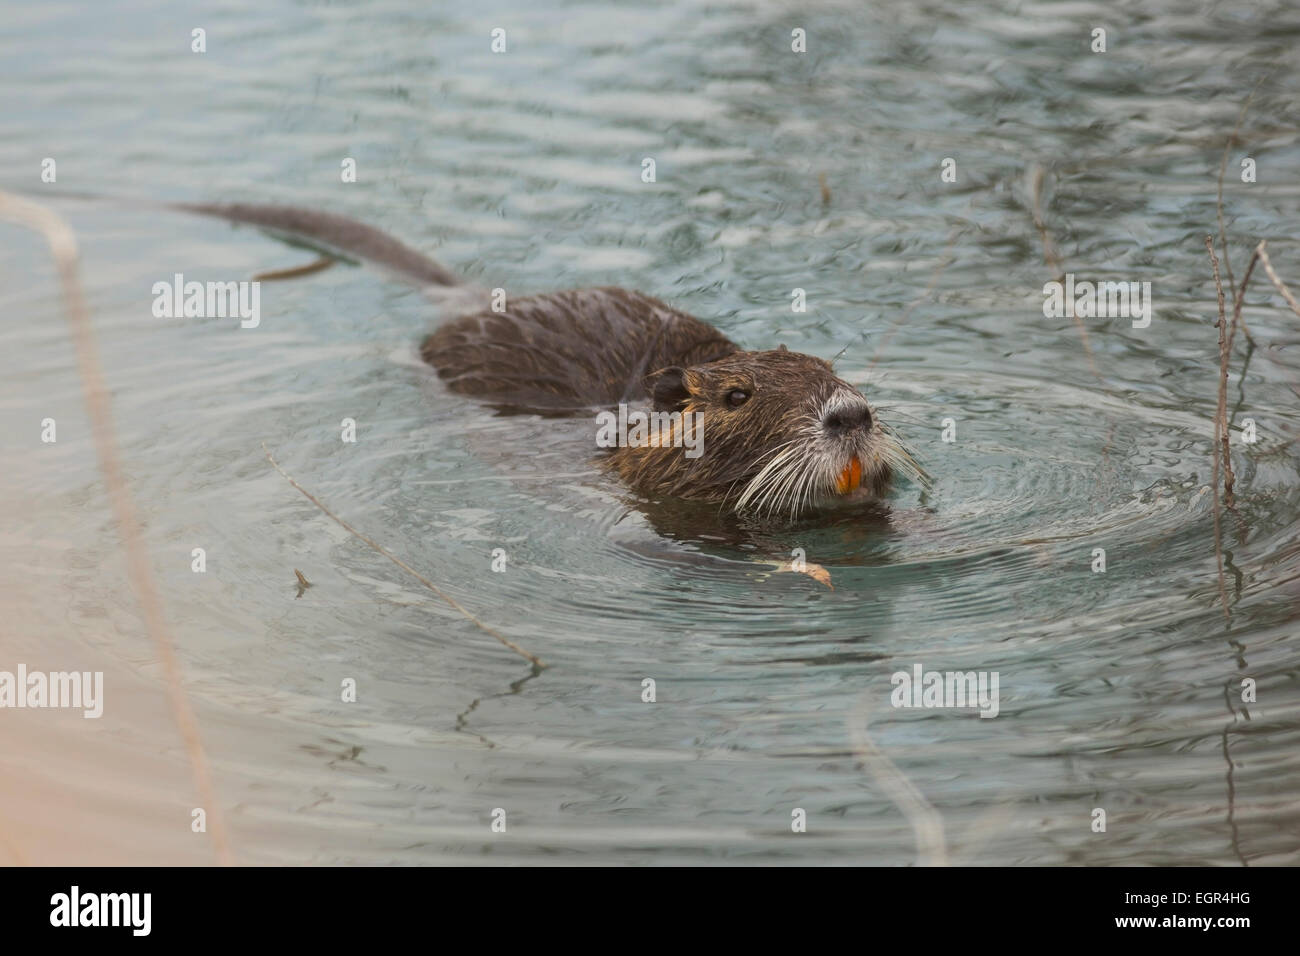 coypu (Myocastor coypus) swimming. This rodent is native to South America. It has been introduced to Europe, North America and A Stock Photo